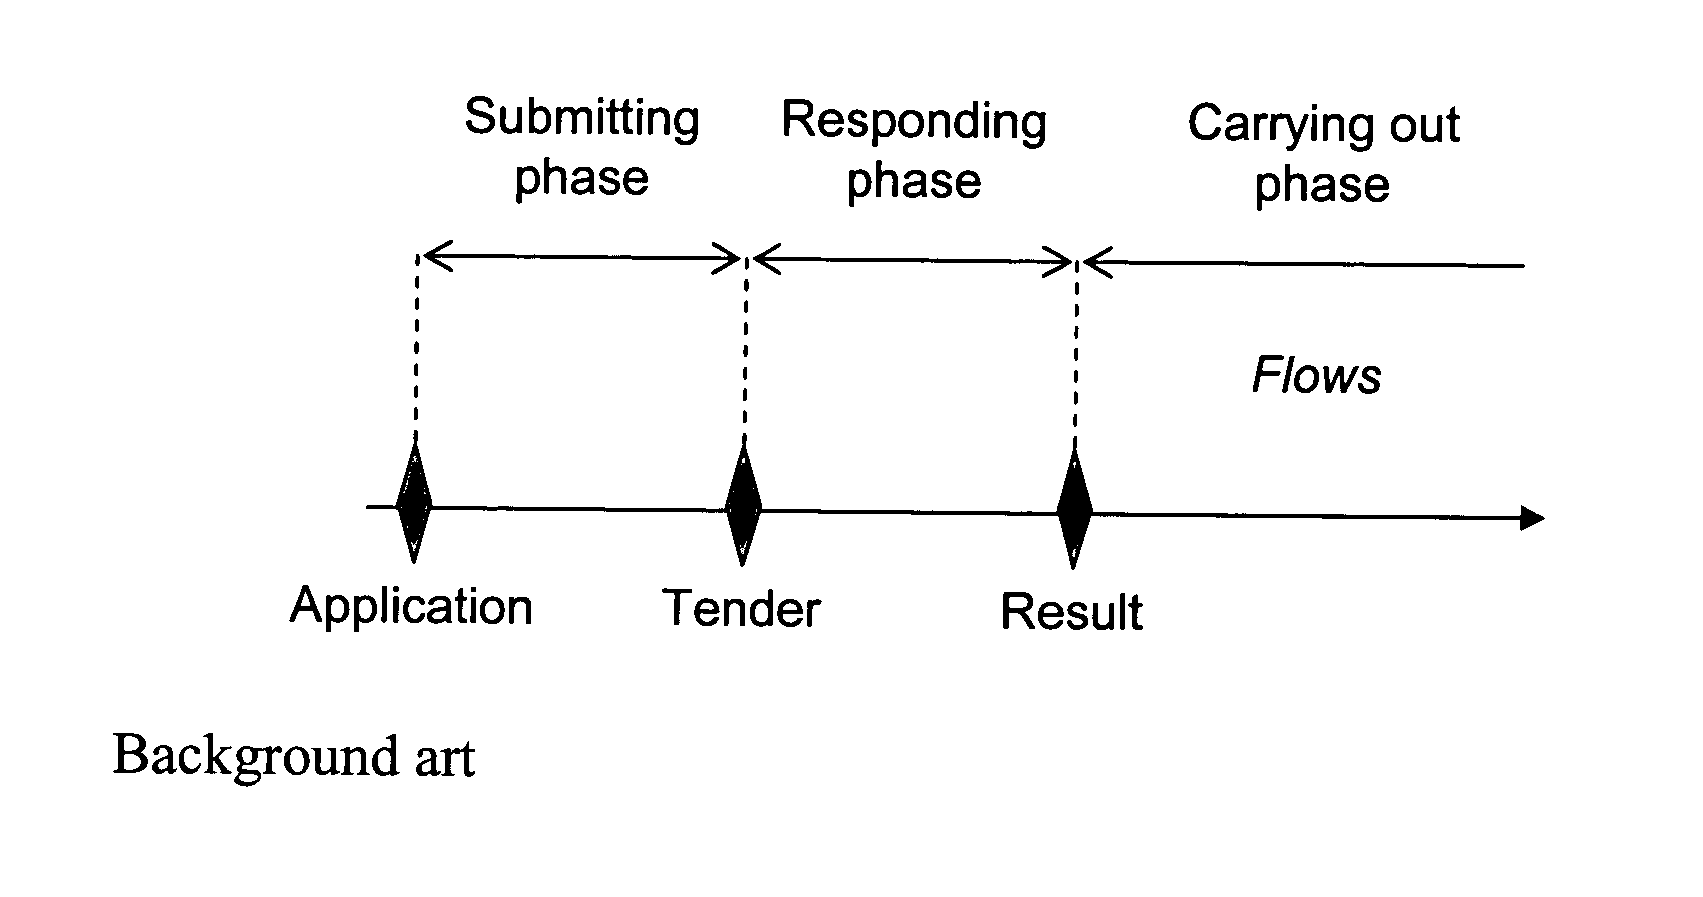 System, method, and computer program product for managing financial risk when issuing tender options